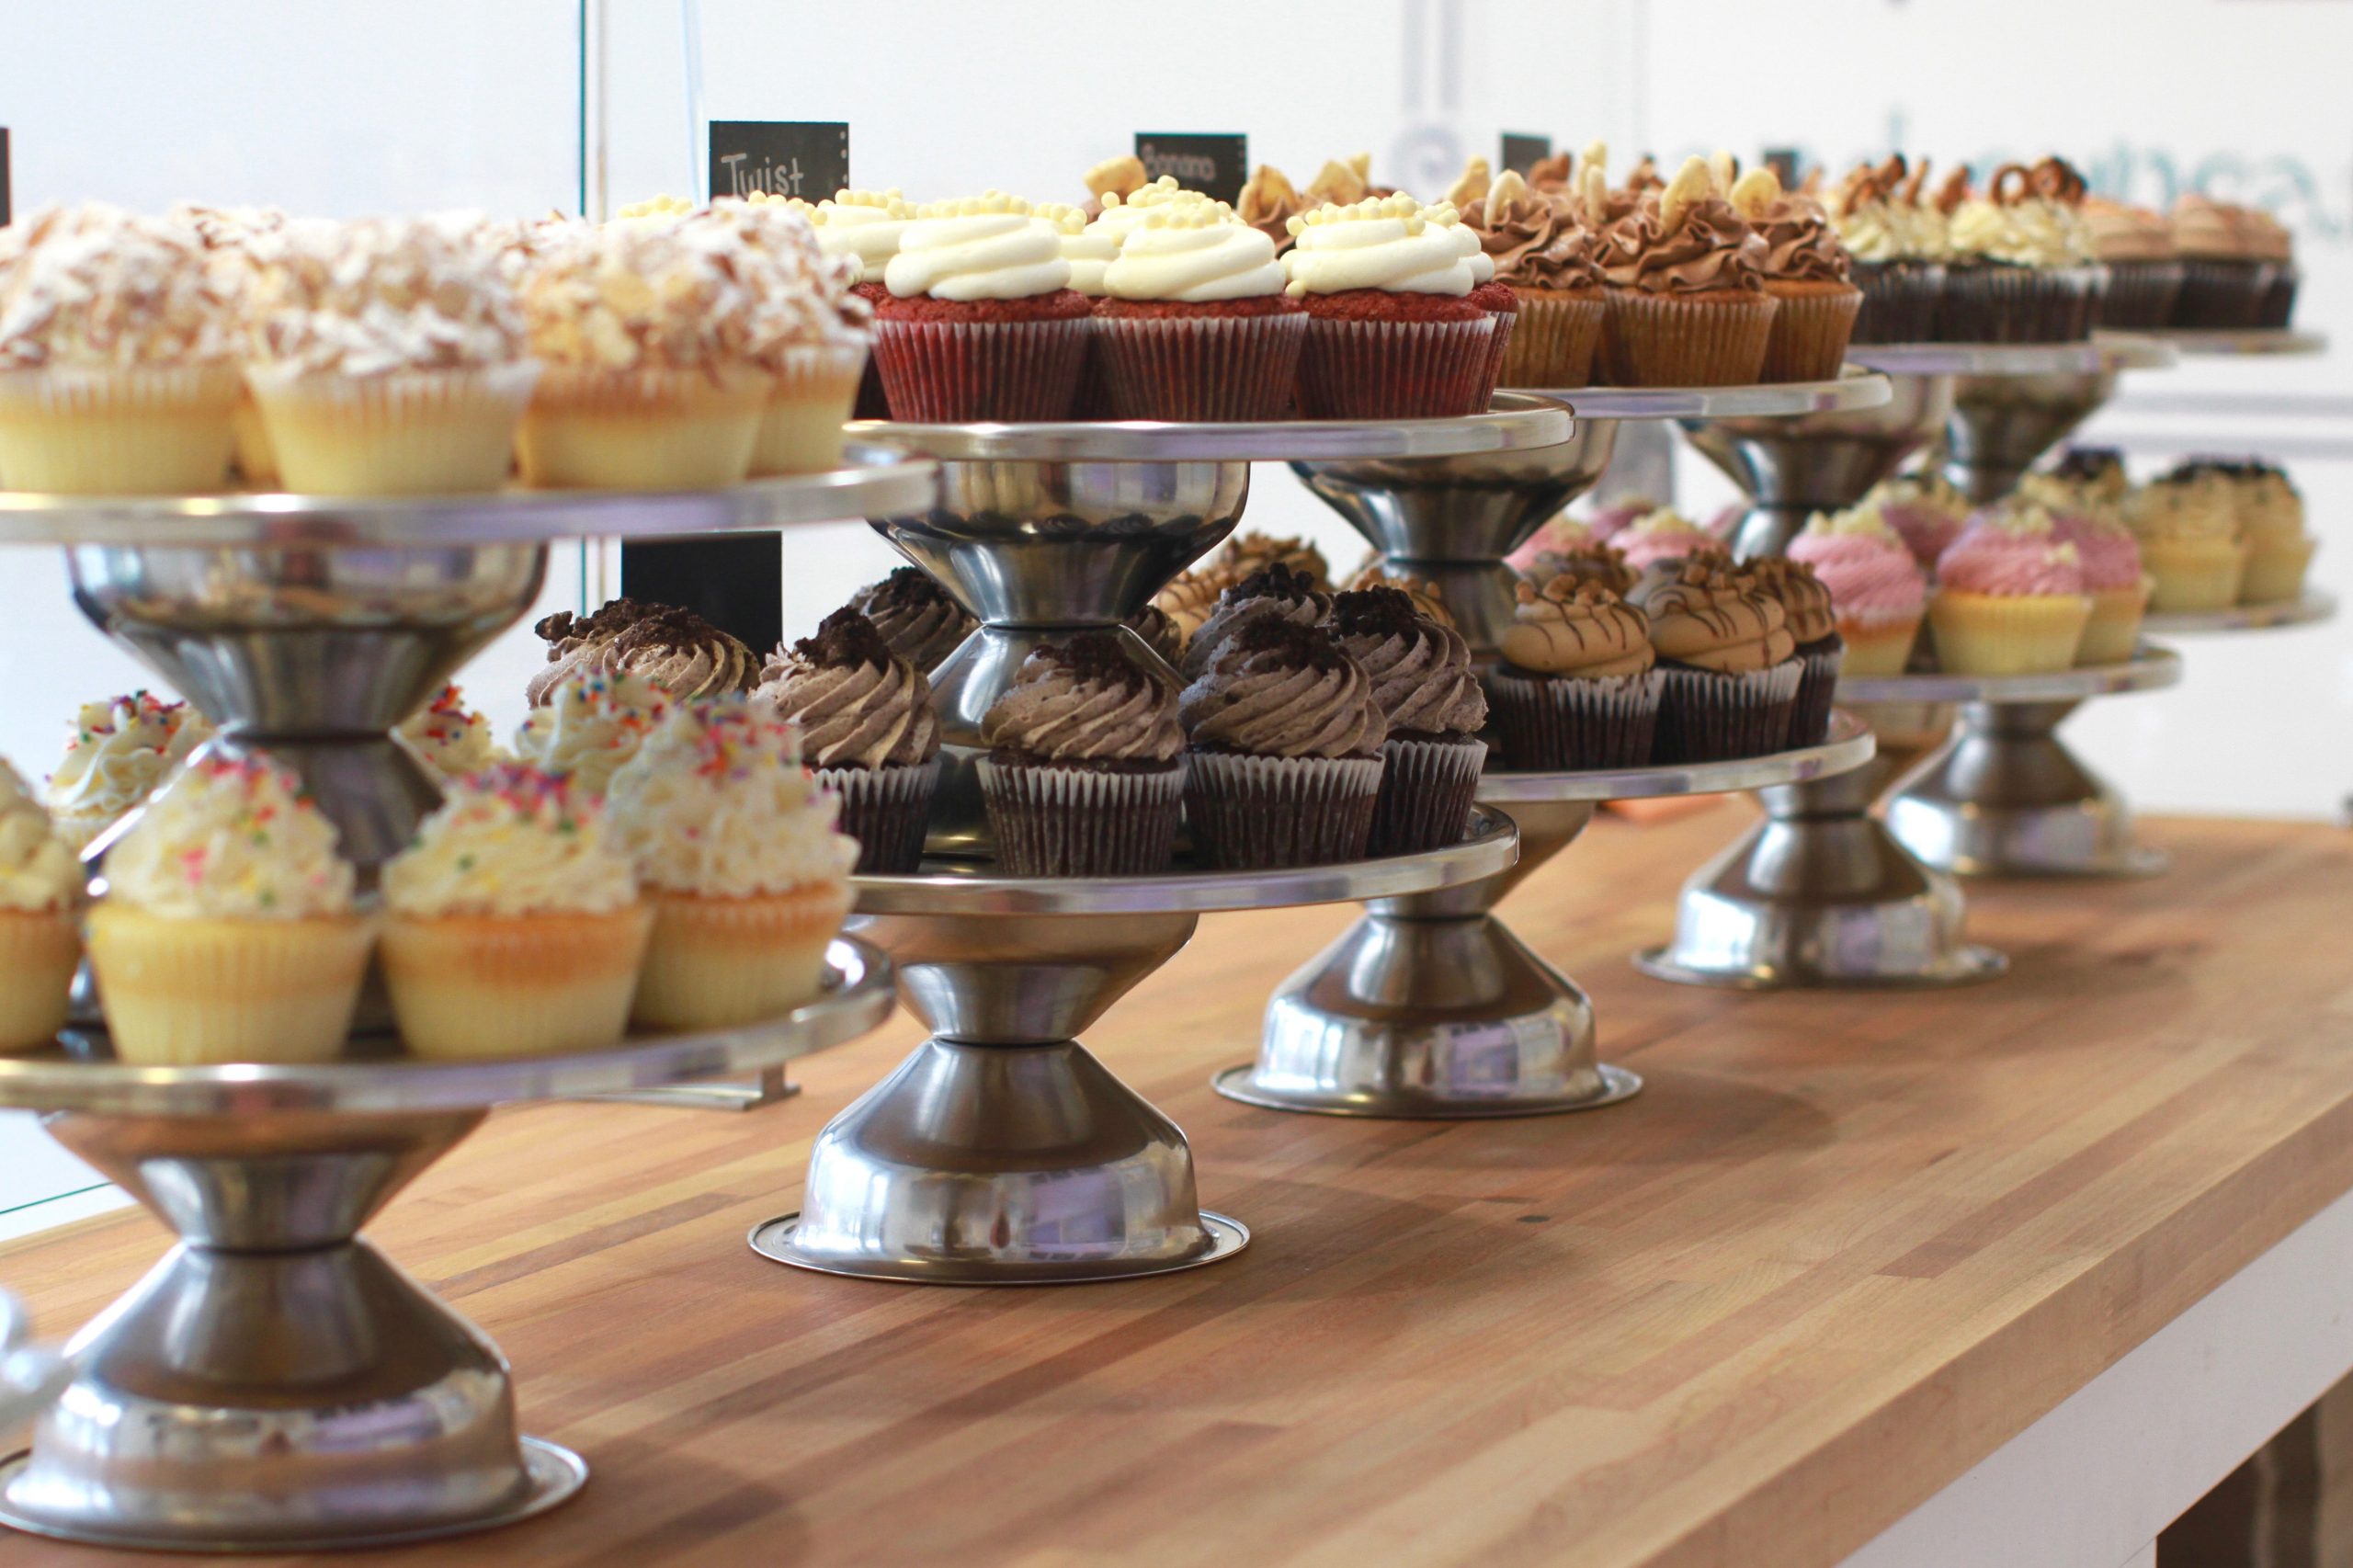 A photograph of a cupcake shop display, showing a variety of small cakes and sweets. Many have intricate toppings and designs.